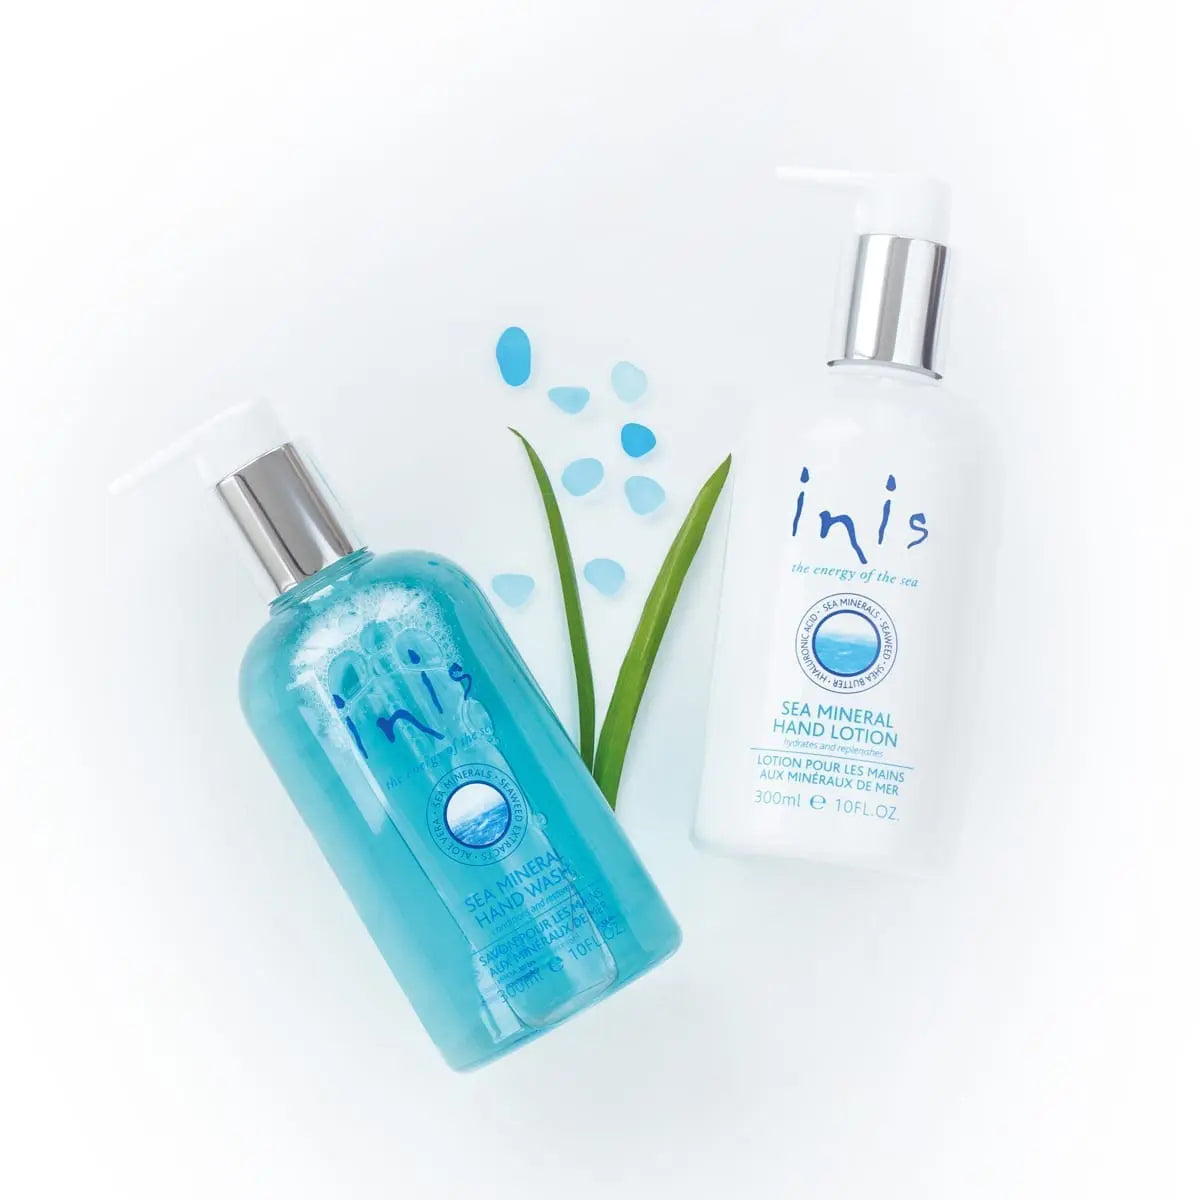 Inis Hand Care Caddy 2 x 10 fl. oz. Soap & Lotion Inis   